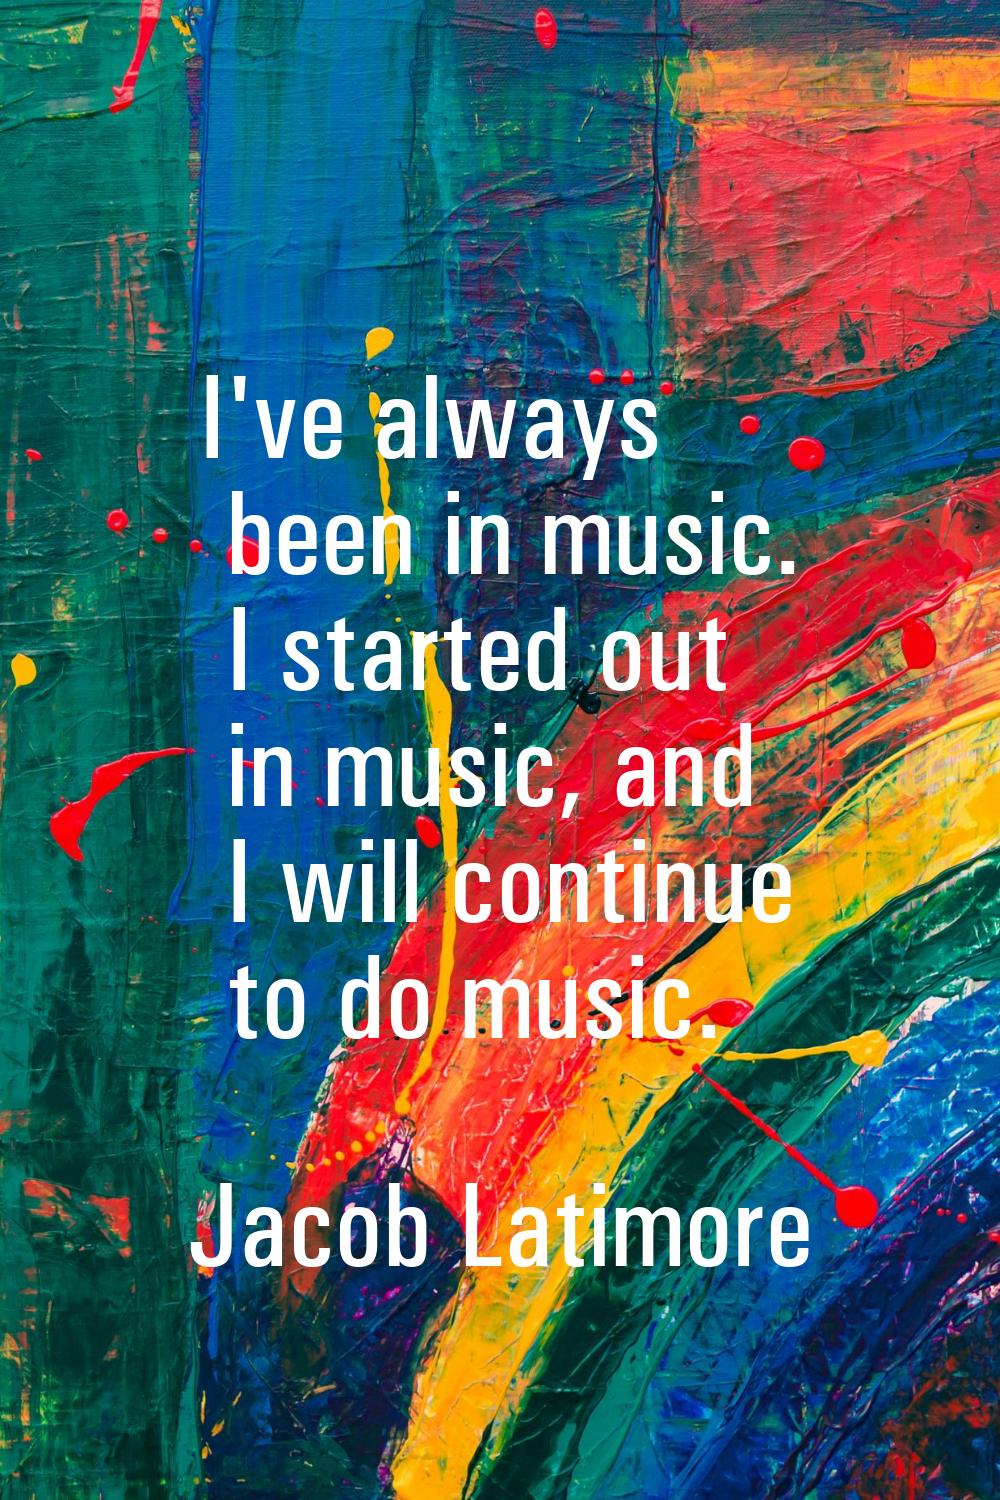 I've always been in music. I started out in music, and I will continue to do music.